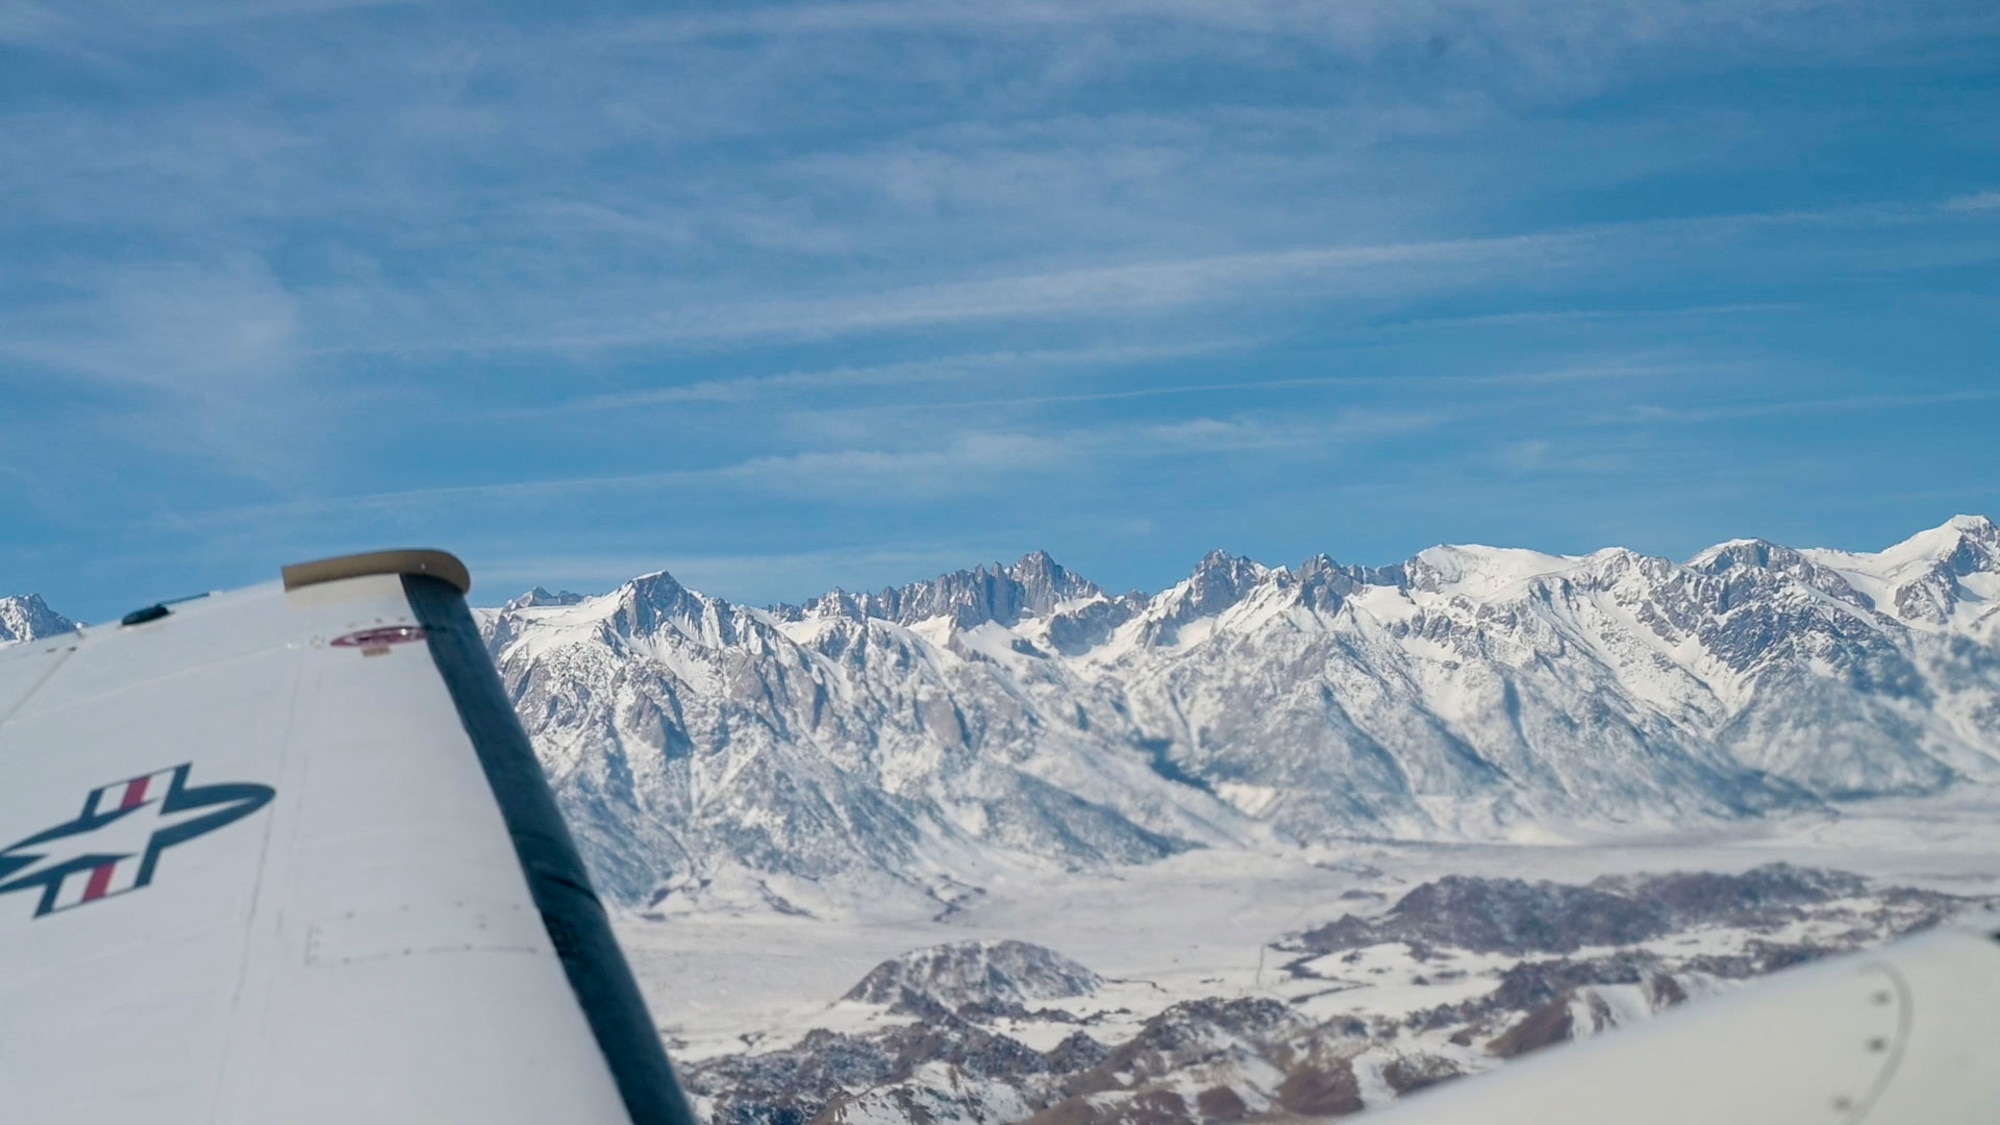 Mount Whitney, the highest mountain in the contiguous United States, can be seen during the Sidewinder low level flight survey through the Southern California wilderness.